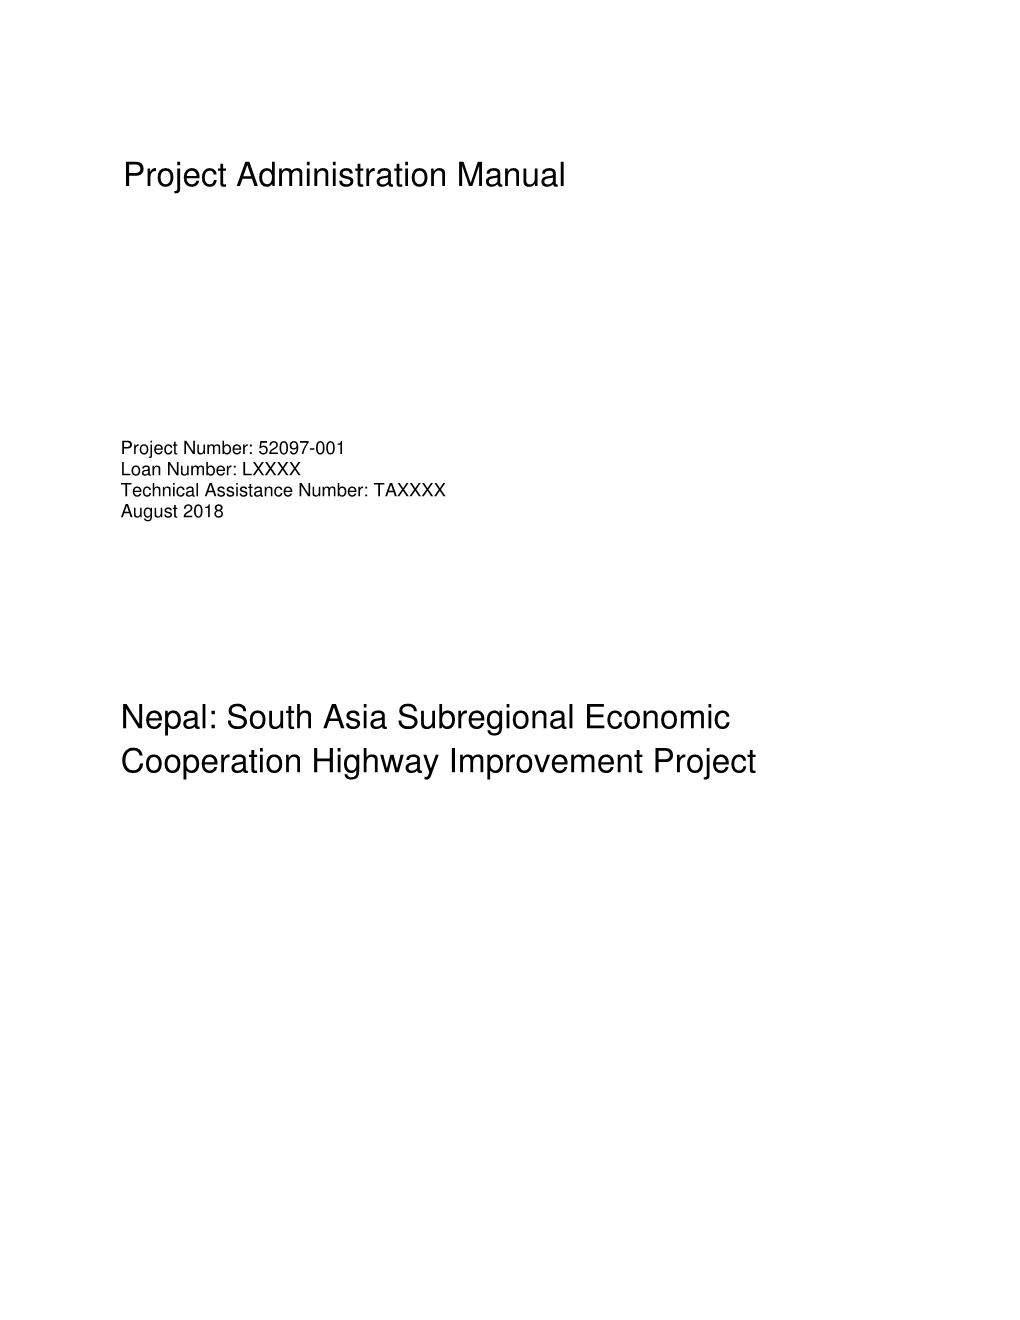 South Asia Subregional Economic Cooperation Highway Improvement Project